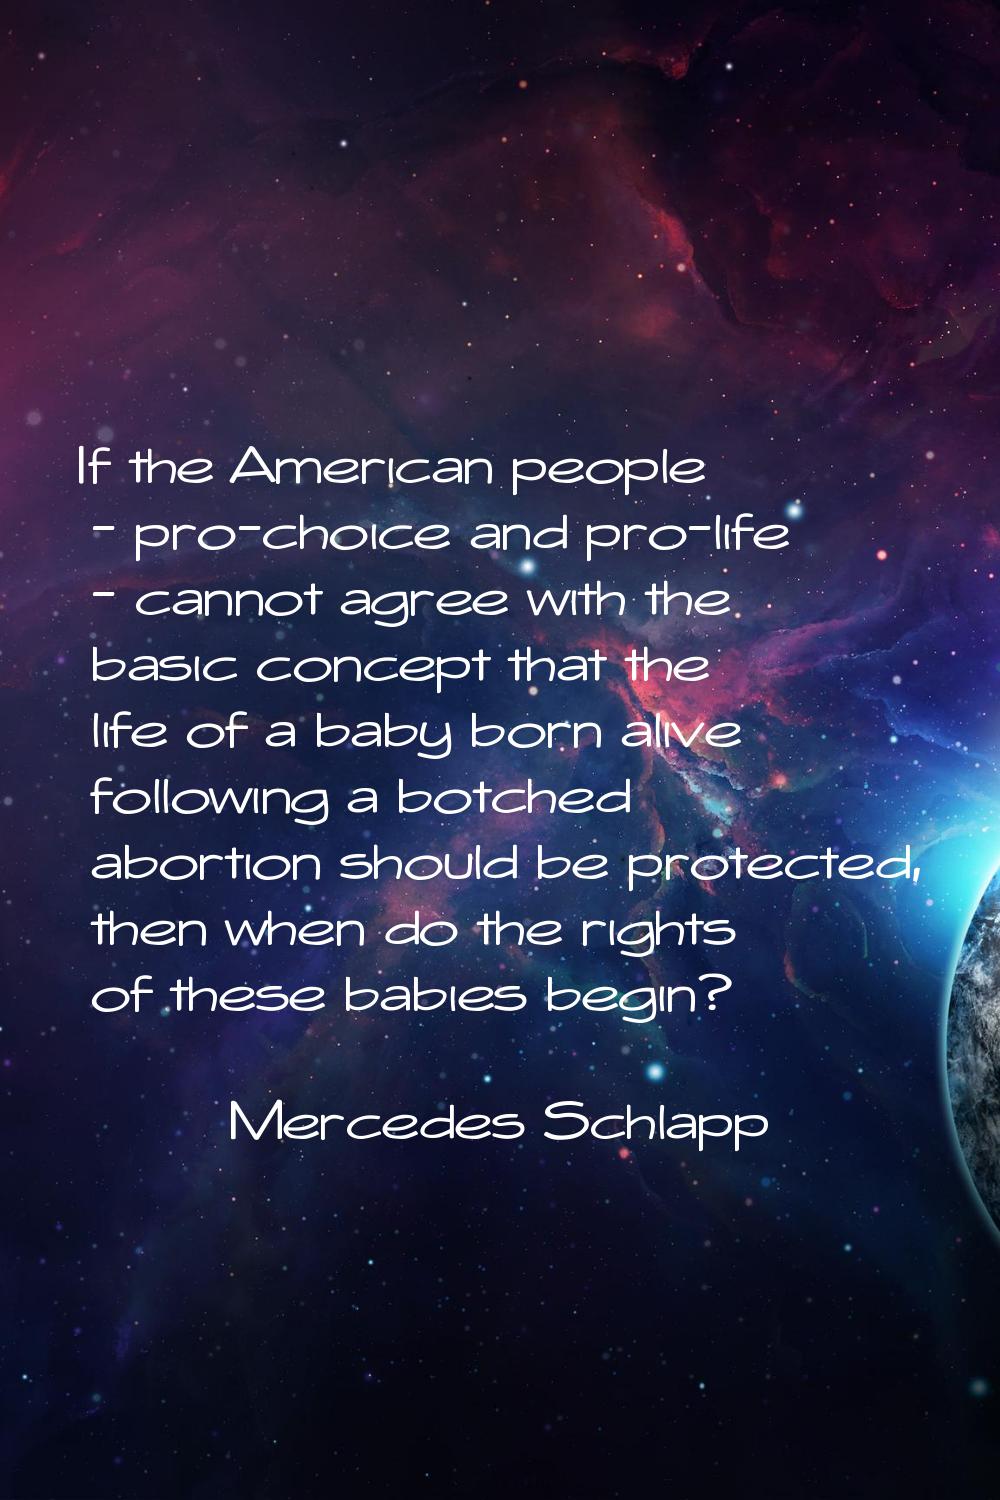 If the American people - pro-choice and pro-life - cannot agree with the basic concept that the lif